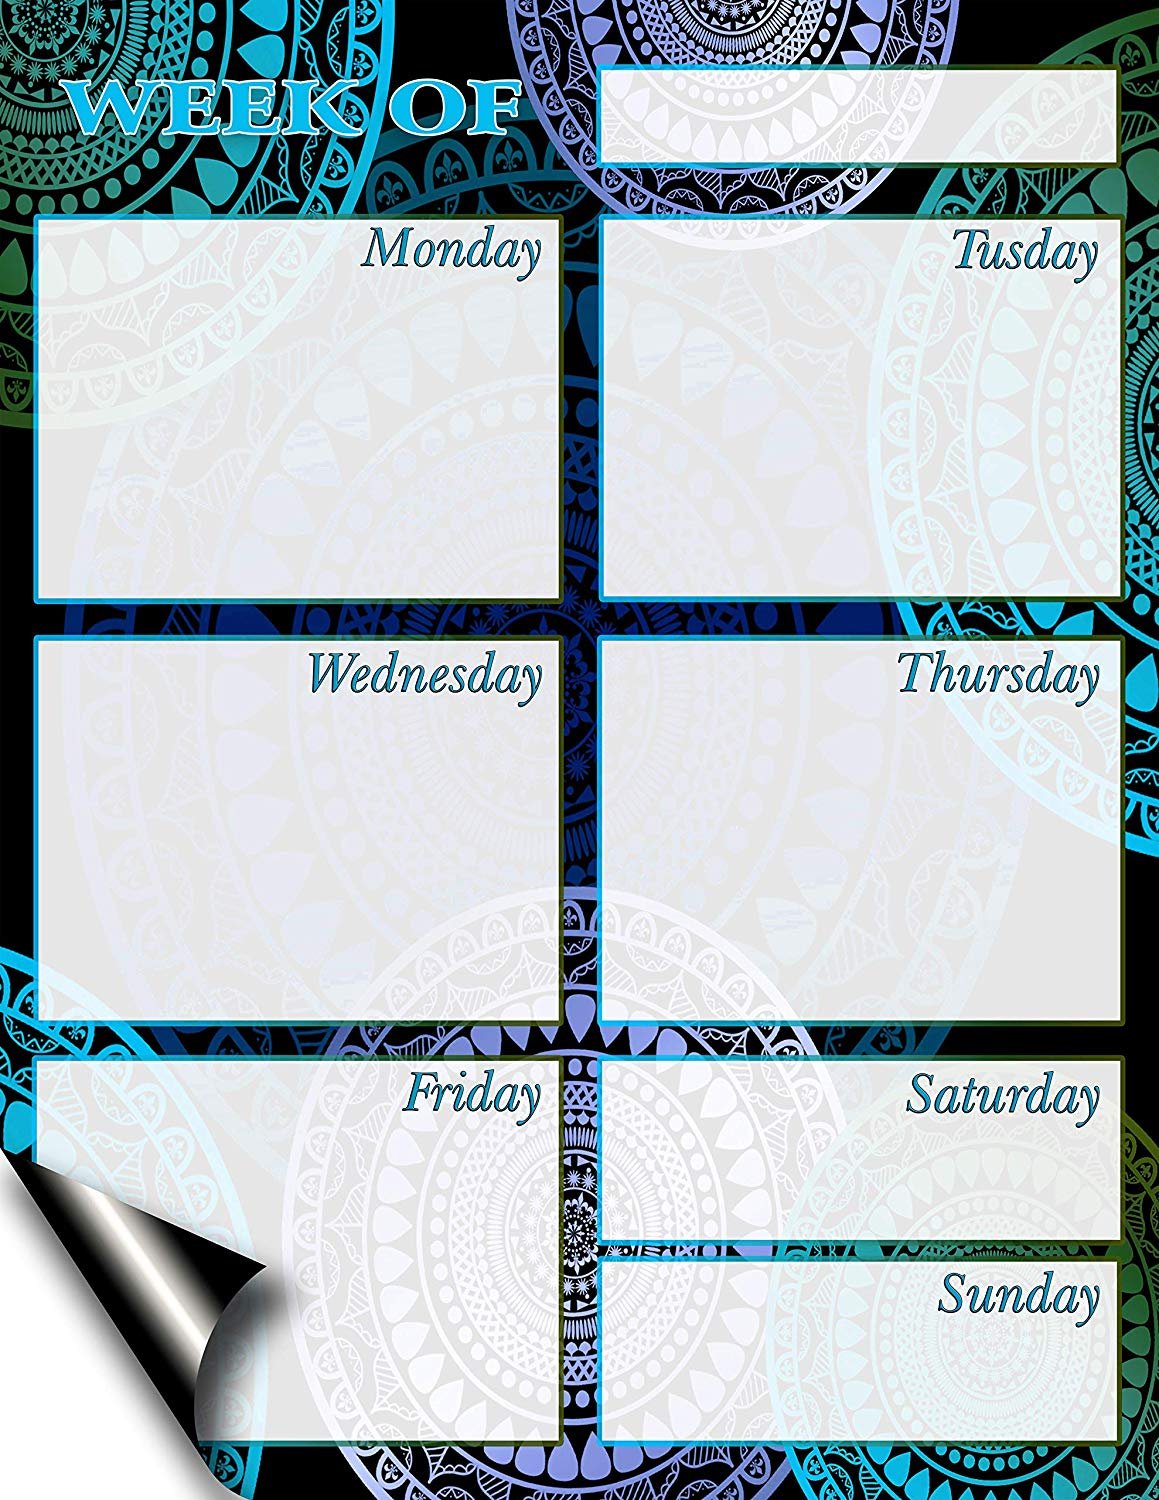 Chore Chart Weekly Planner To Do List Message Board Edition 5